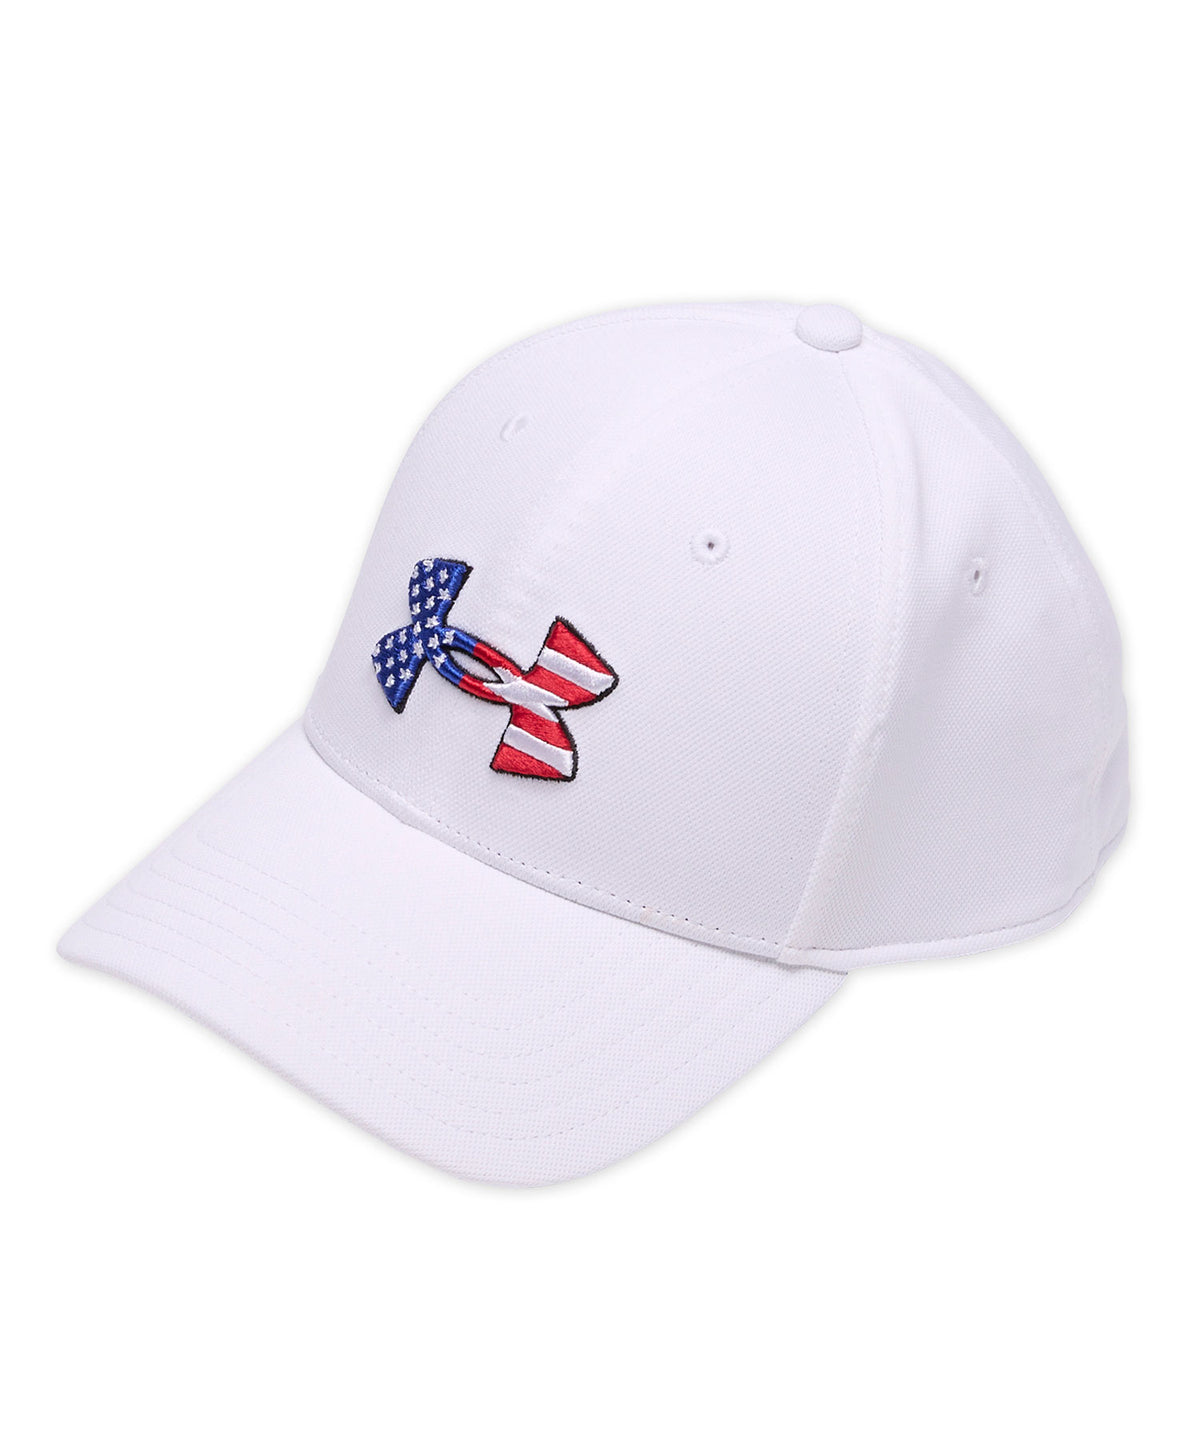 Under Armour Freedom Blitzing Hat, Big & Tall